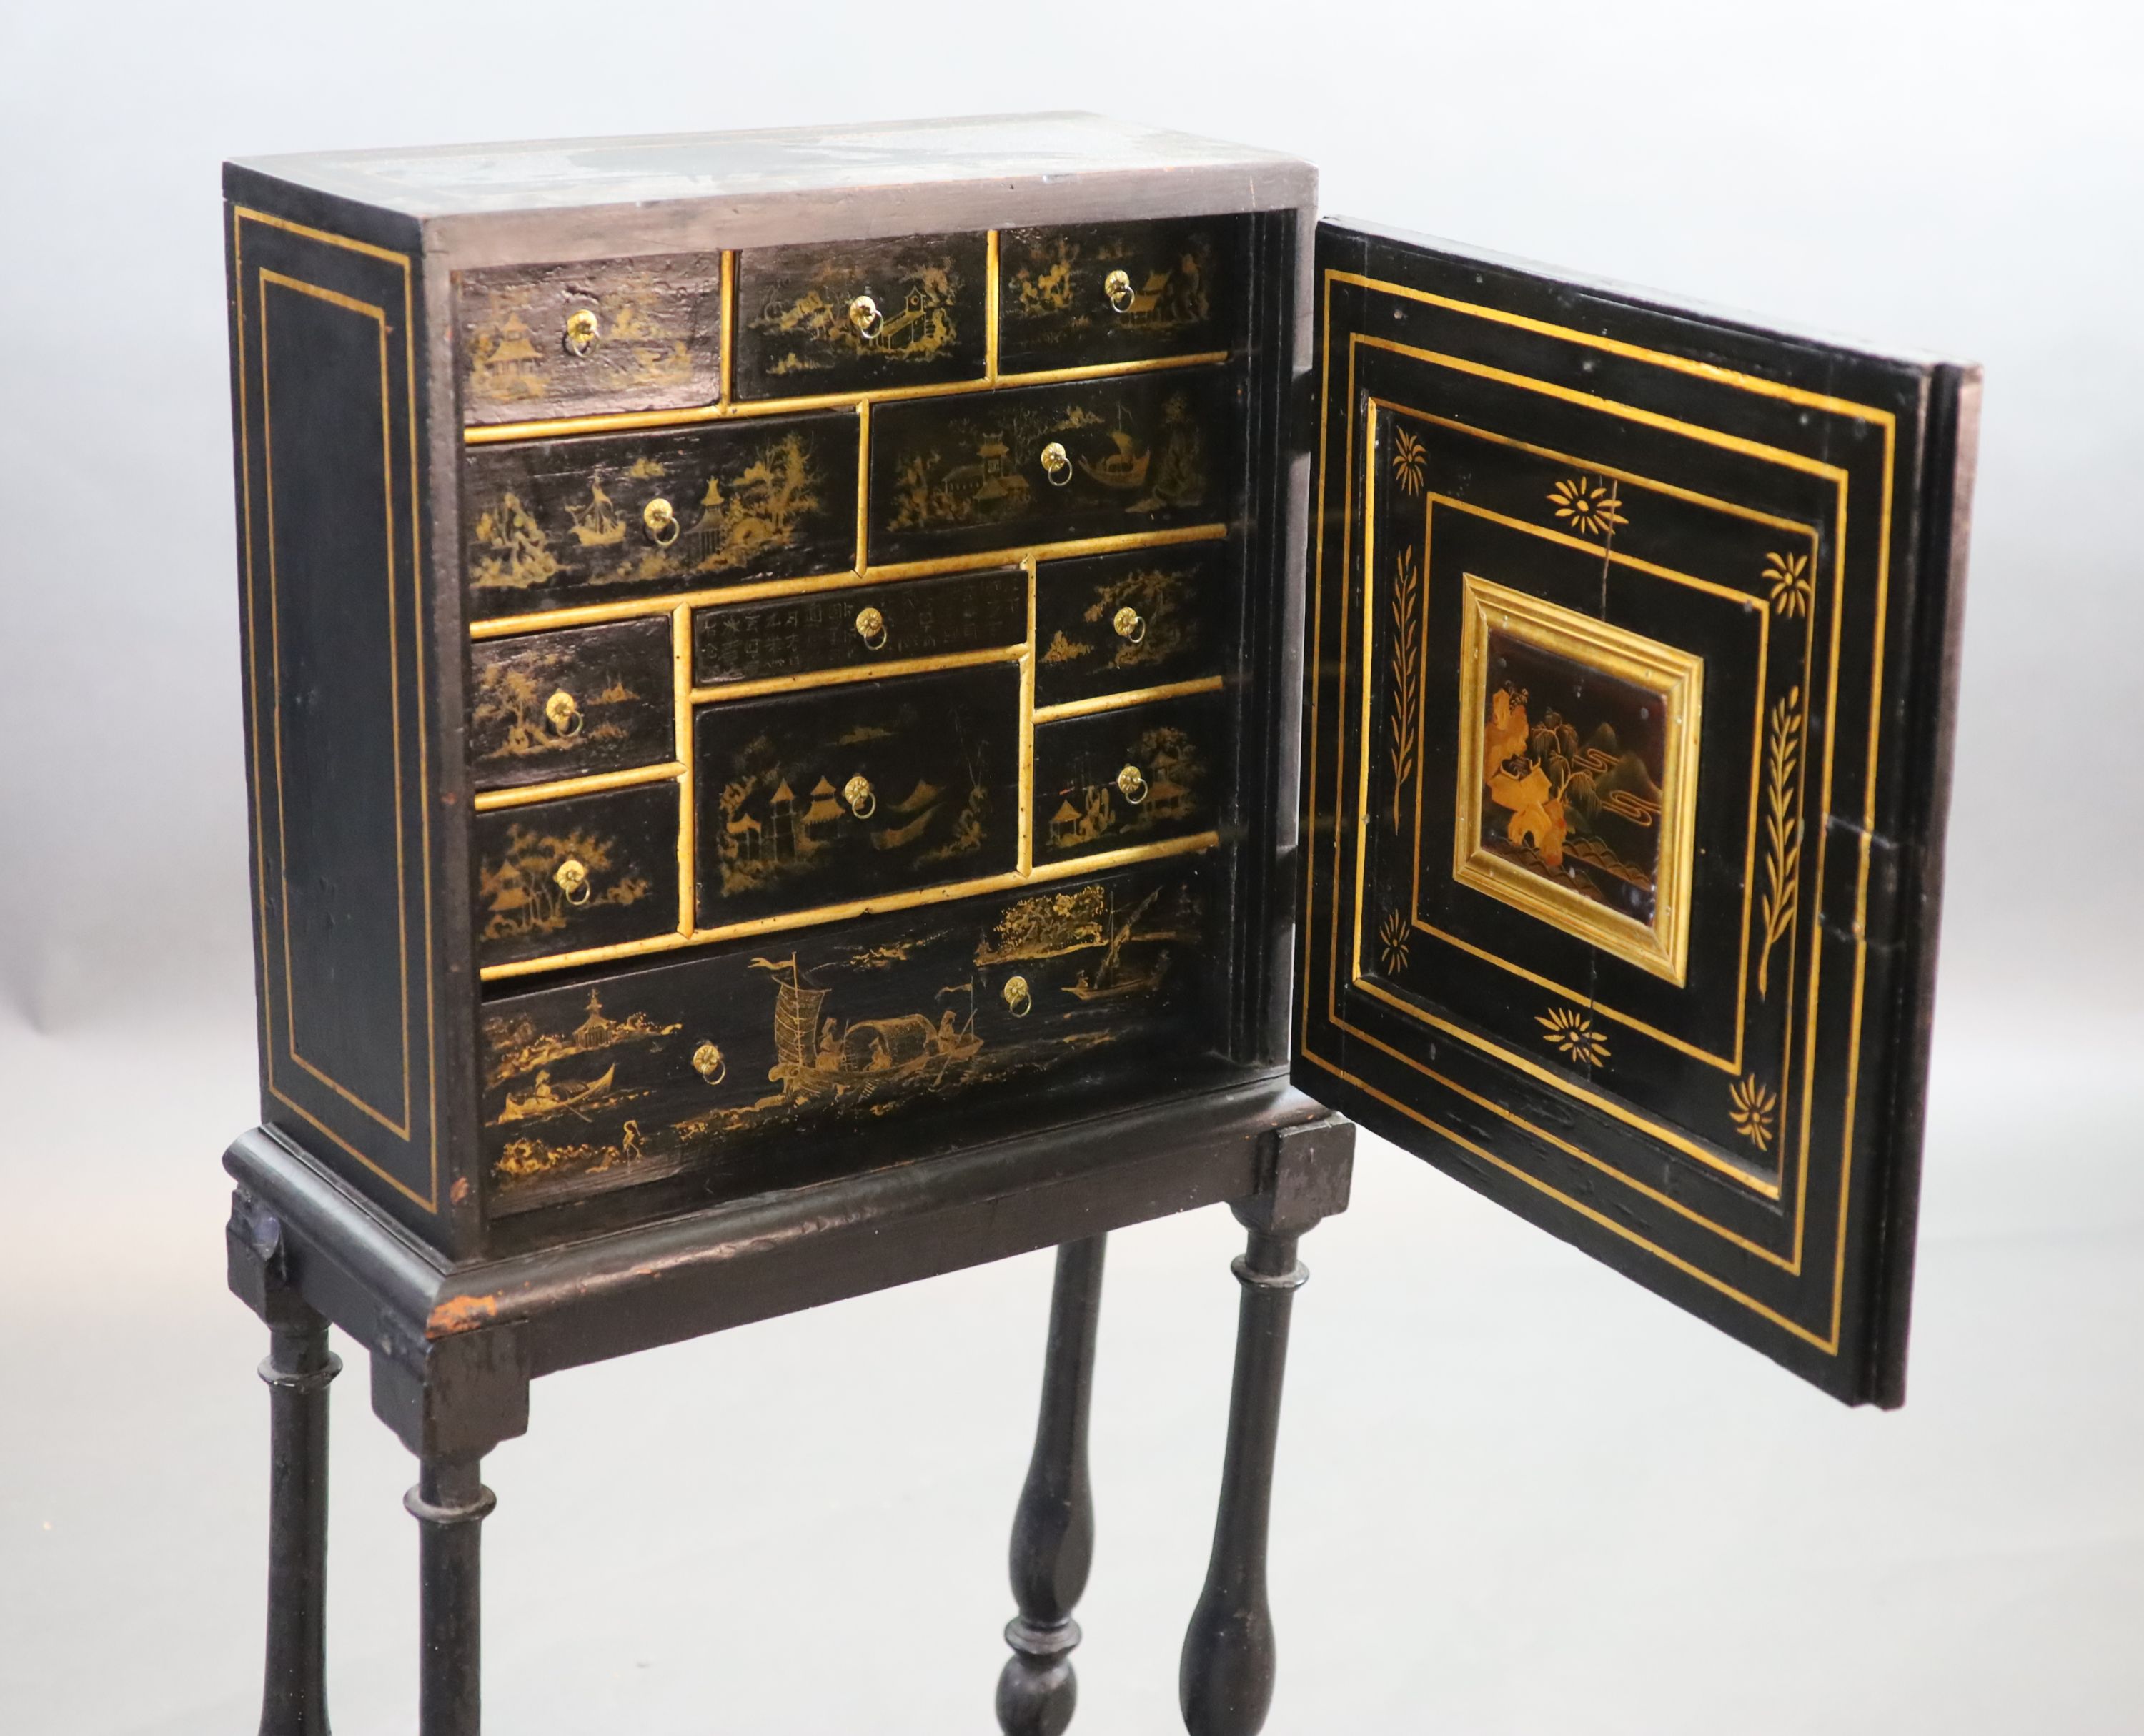 An early 18th century European japanned cabinet on stand, W.54cm D.24cm H.115.5cm